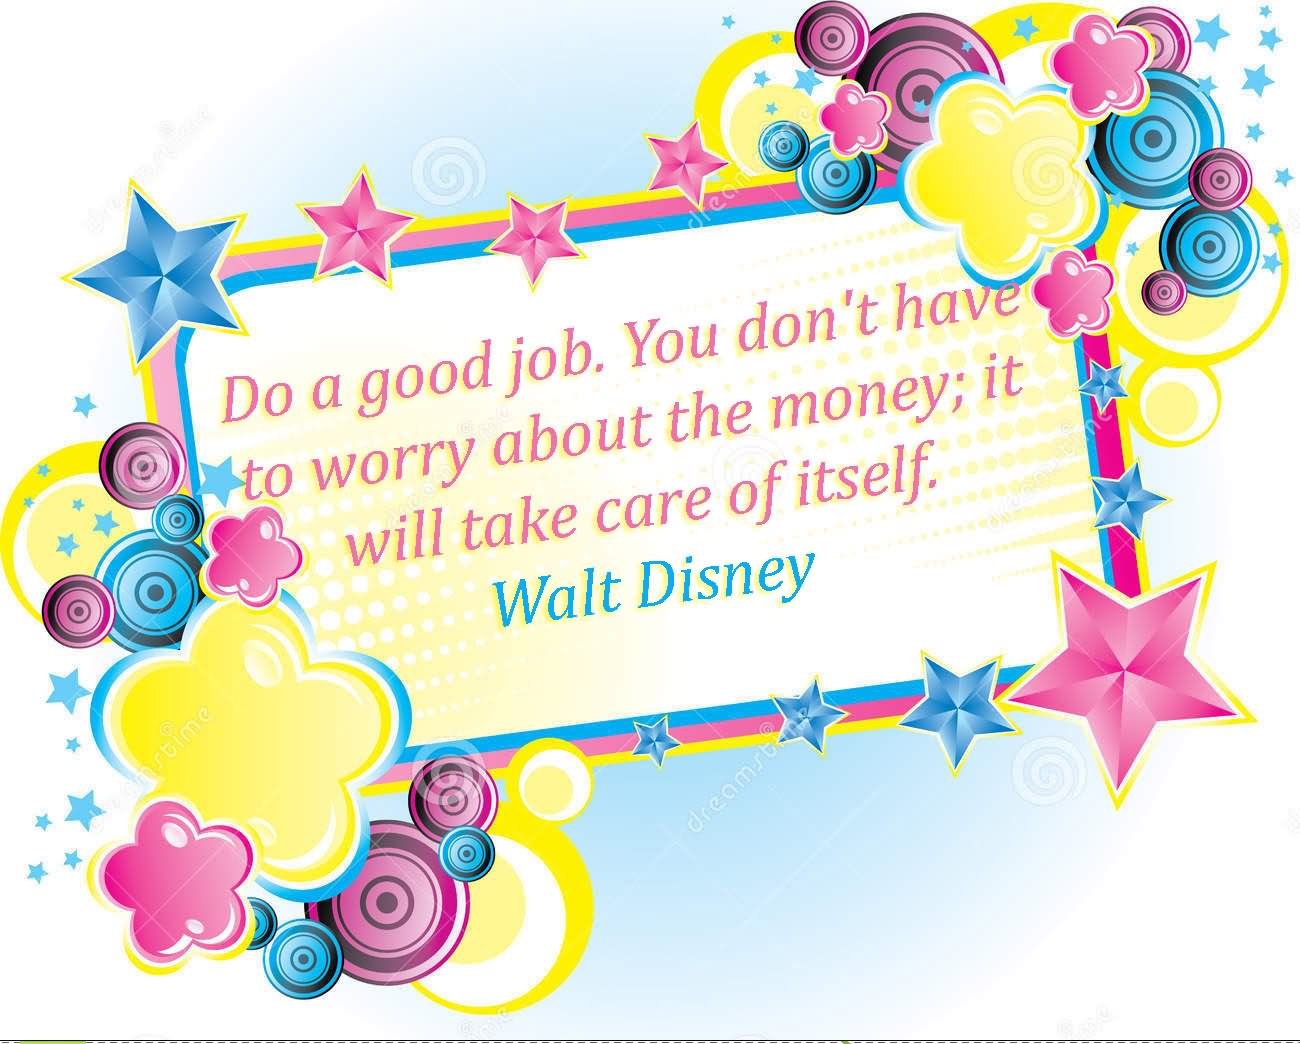 Do a good job. You don’t have to worry about the money; it will take care of itself.